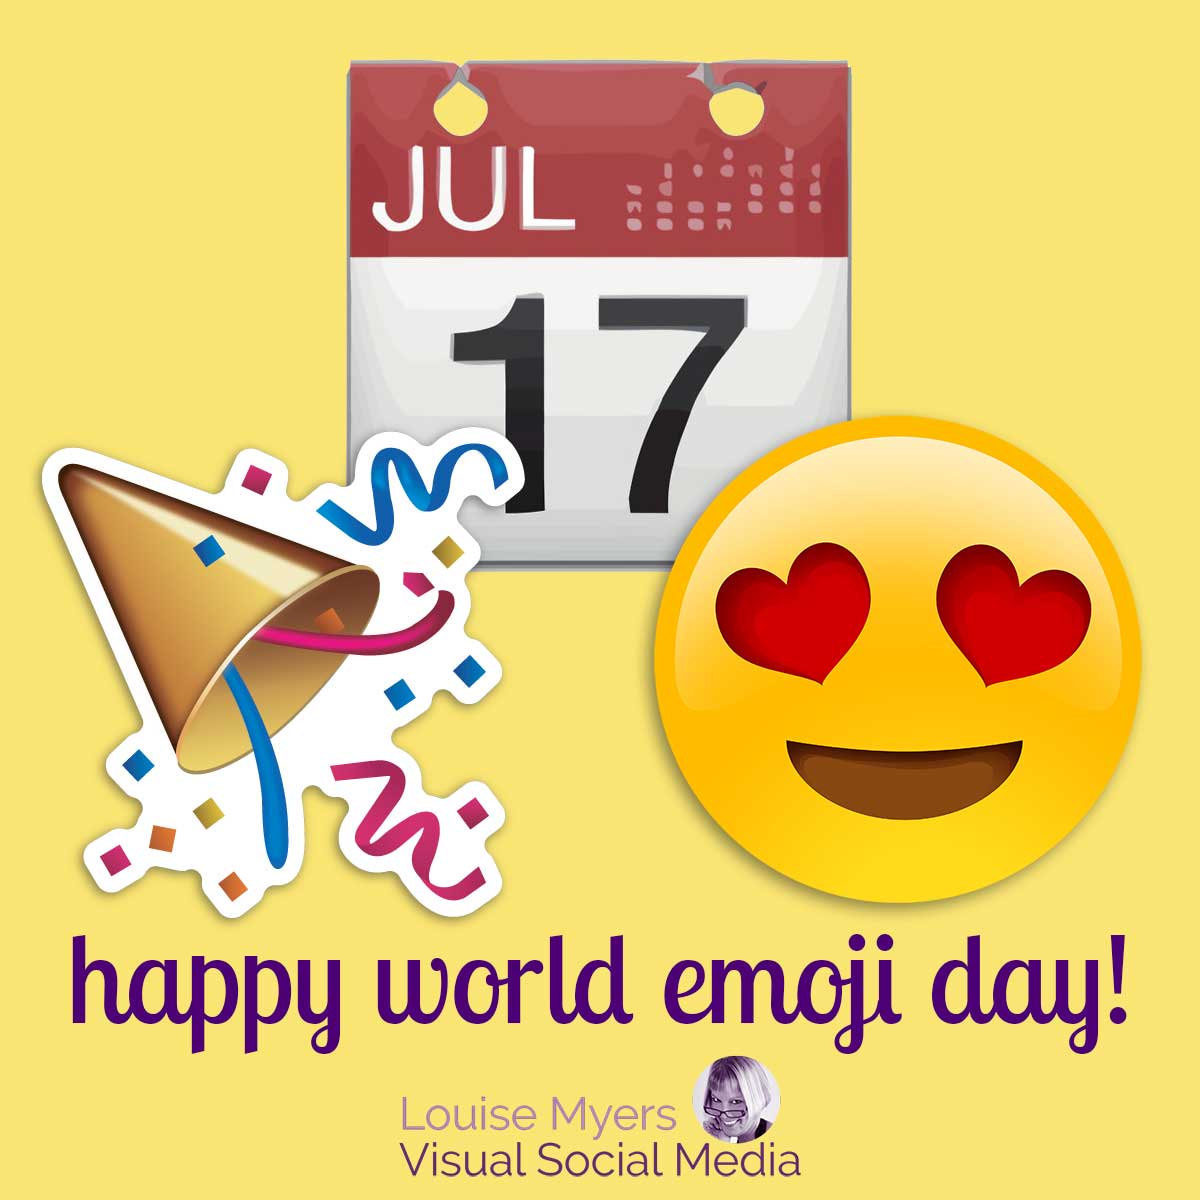 calendar emoji says jul 17 with heart eyes and party emojis and text Happy World Emoji Day.